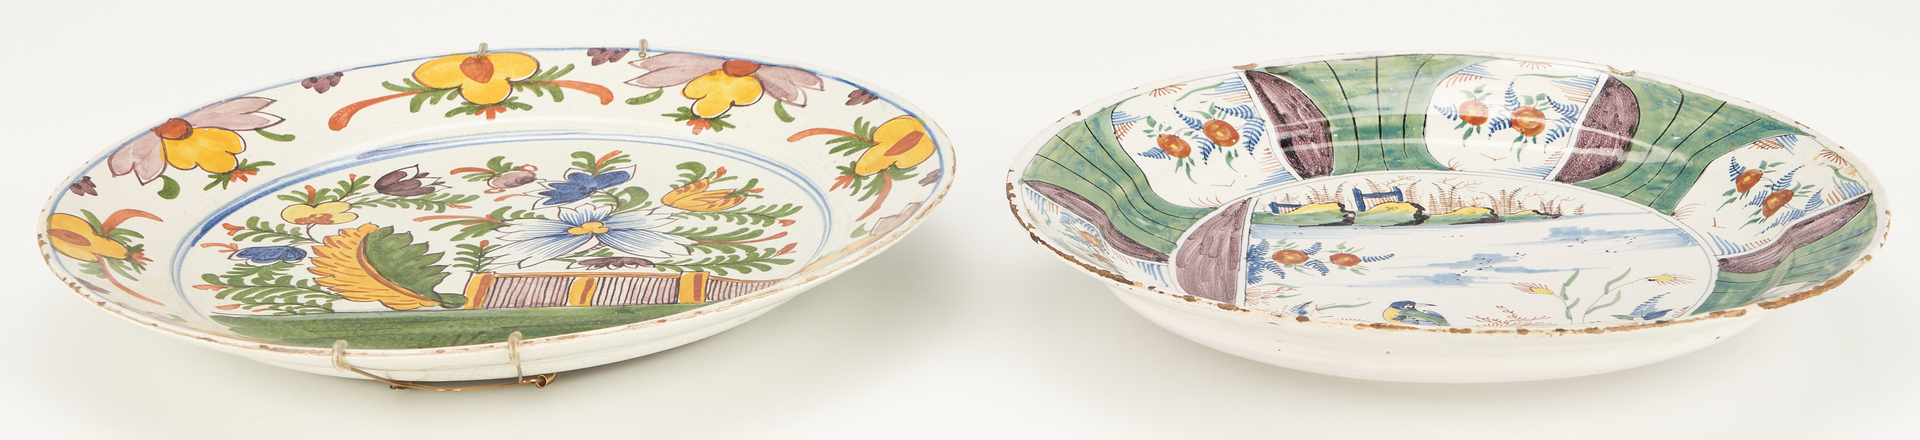 Lot 974: 2 Delft Polychrome Chargers